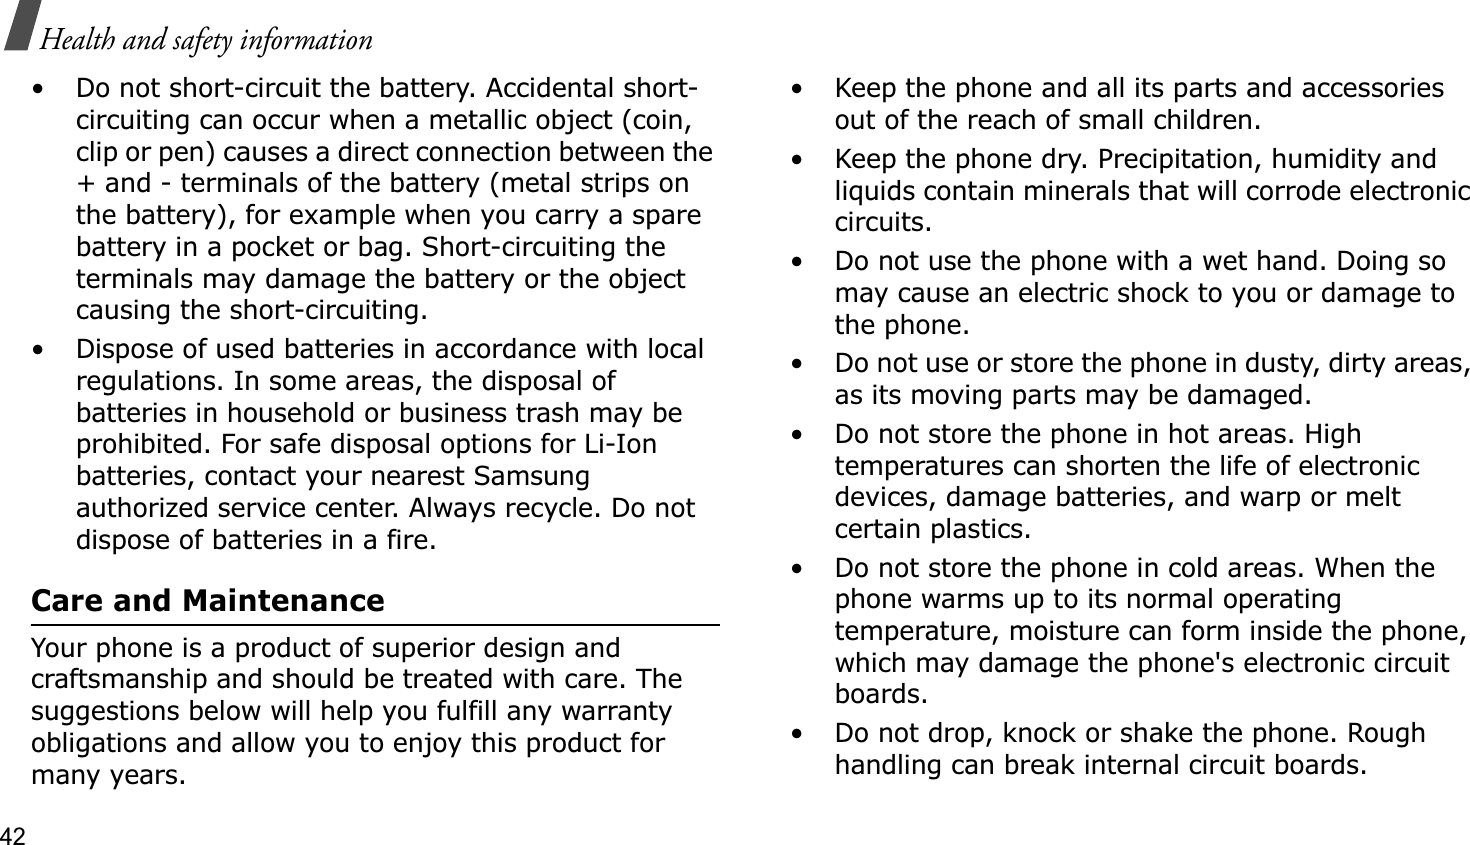 42Health and safety information• Do not short-circuit the battery. Accidental short- circuiting can occur when a metallic object (coin, clip or pen) causes a direct connection between the + and - terminals of the battery (metal strips on the battery), for example when you carry a spare battery in a pocket or bag. Short-circuiting the terminals may damage the battery or the object causing the short-circuiting.• Dispose of used batteries in accordance with local regulations. In some areas, the disposal of batteries in household or business trash may be prohibited. For safe disposal options for Li-Ion batteries, contact your nearest Samsung authorized service center. Always recycle. Do not dispose of batteries in a fire.Care and MaintenanceYour phone is a product of superior design and craftsmanship and should be treated with care. The suggestions below will help you fulfill any warranty obligations and allow you to enjoy this product for many years.• Keep the phone and all its parts and accessories out of the reach of small children.• Keep the phone dry. Precipitation, humidity and liquids contain minerals that will corrode electronic circuits.• Do not use the phone with a wet hand. Doing so may cause an electric shock to you or damage to the phone.• Do not use or store the phone in dusty, dirty areas, as its moving parts may be damaged.• Do not store the phone in hot areas. High temperatures can shorten the life of electronic devices, damage batteries, and warp or melt certain plastics.• Do not store the phone in cold areas. When the phone warms up to its normal operating temperature, moisture can form inside the phone, which may damage the phone&apos;s electronic circuit boards.• Do not drop, knock or shake the phone. Rough handling can break internal circuit boards.